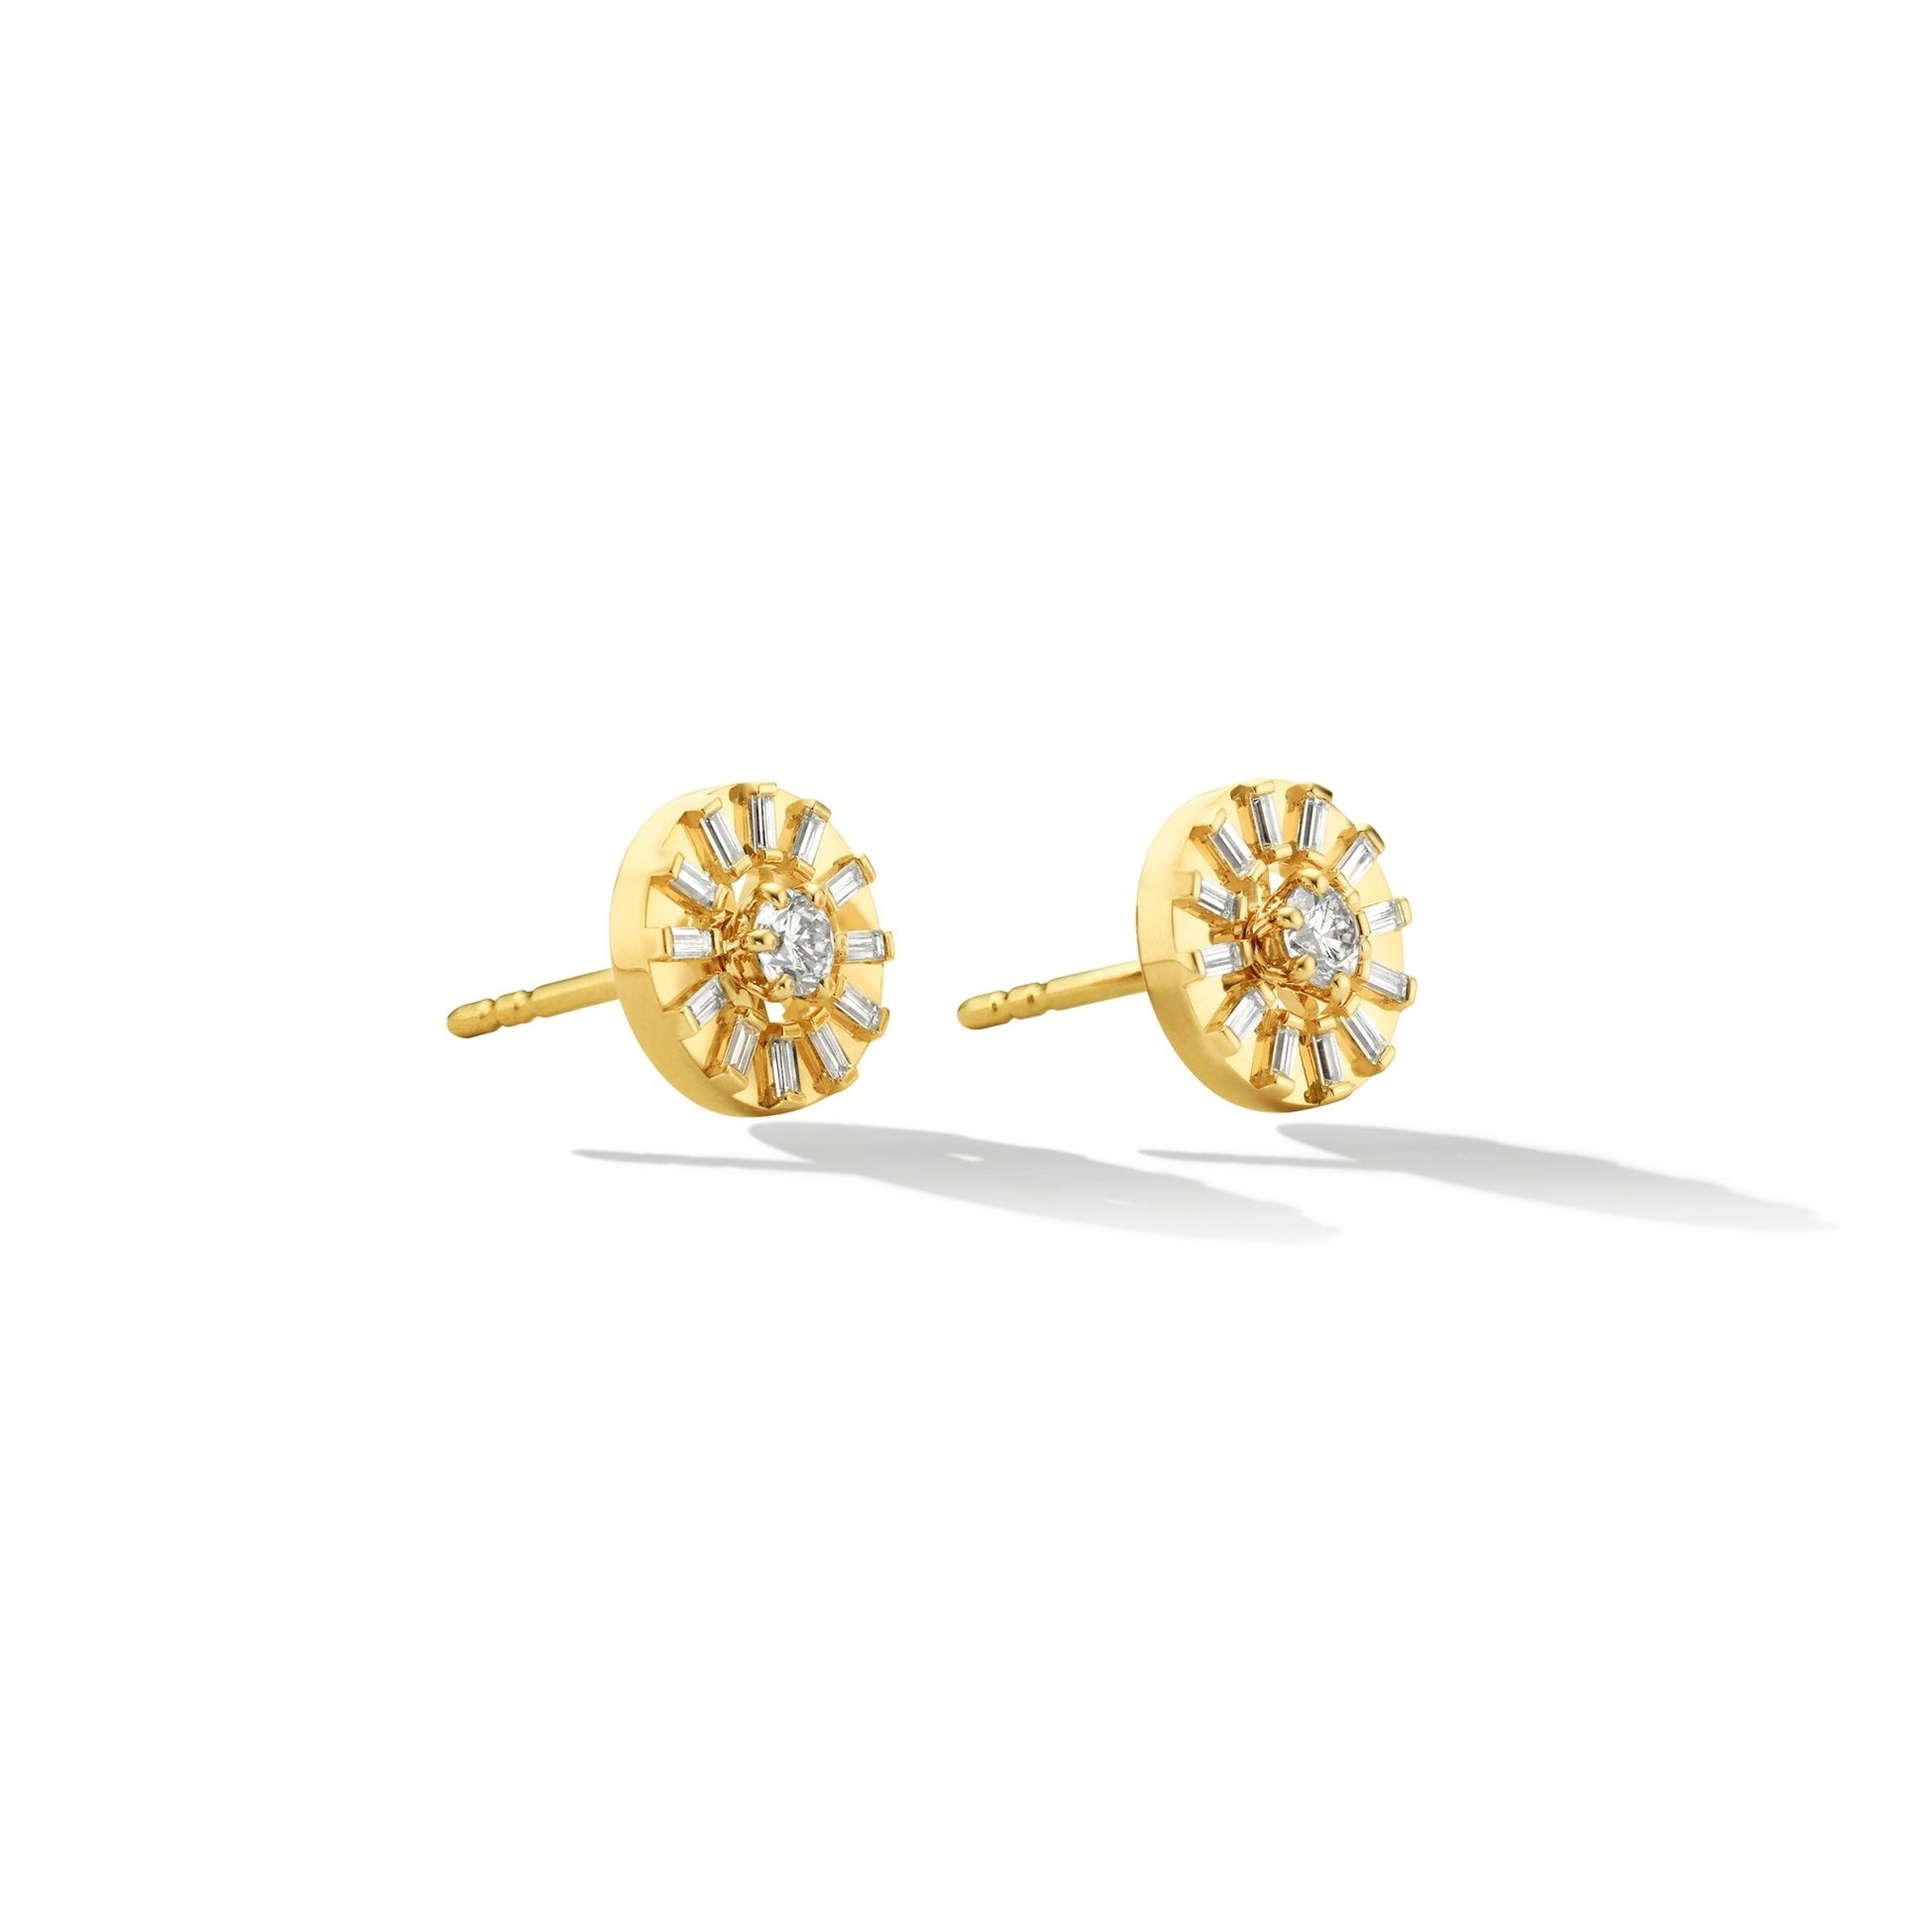 Yellow Gold Sole Stud Earrings with White Diamonds - Cadar